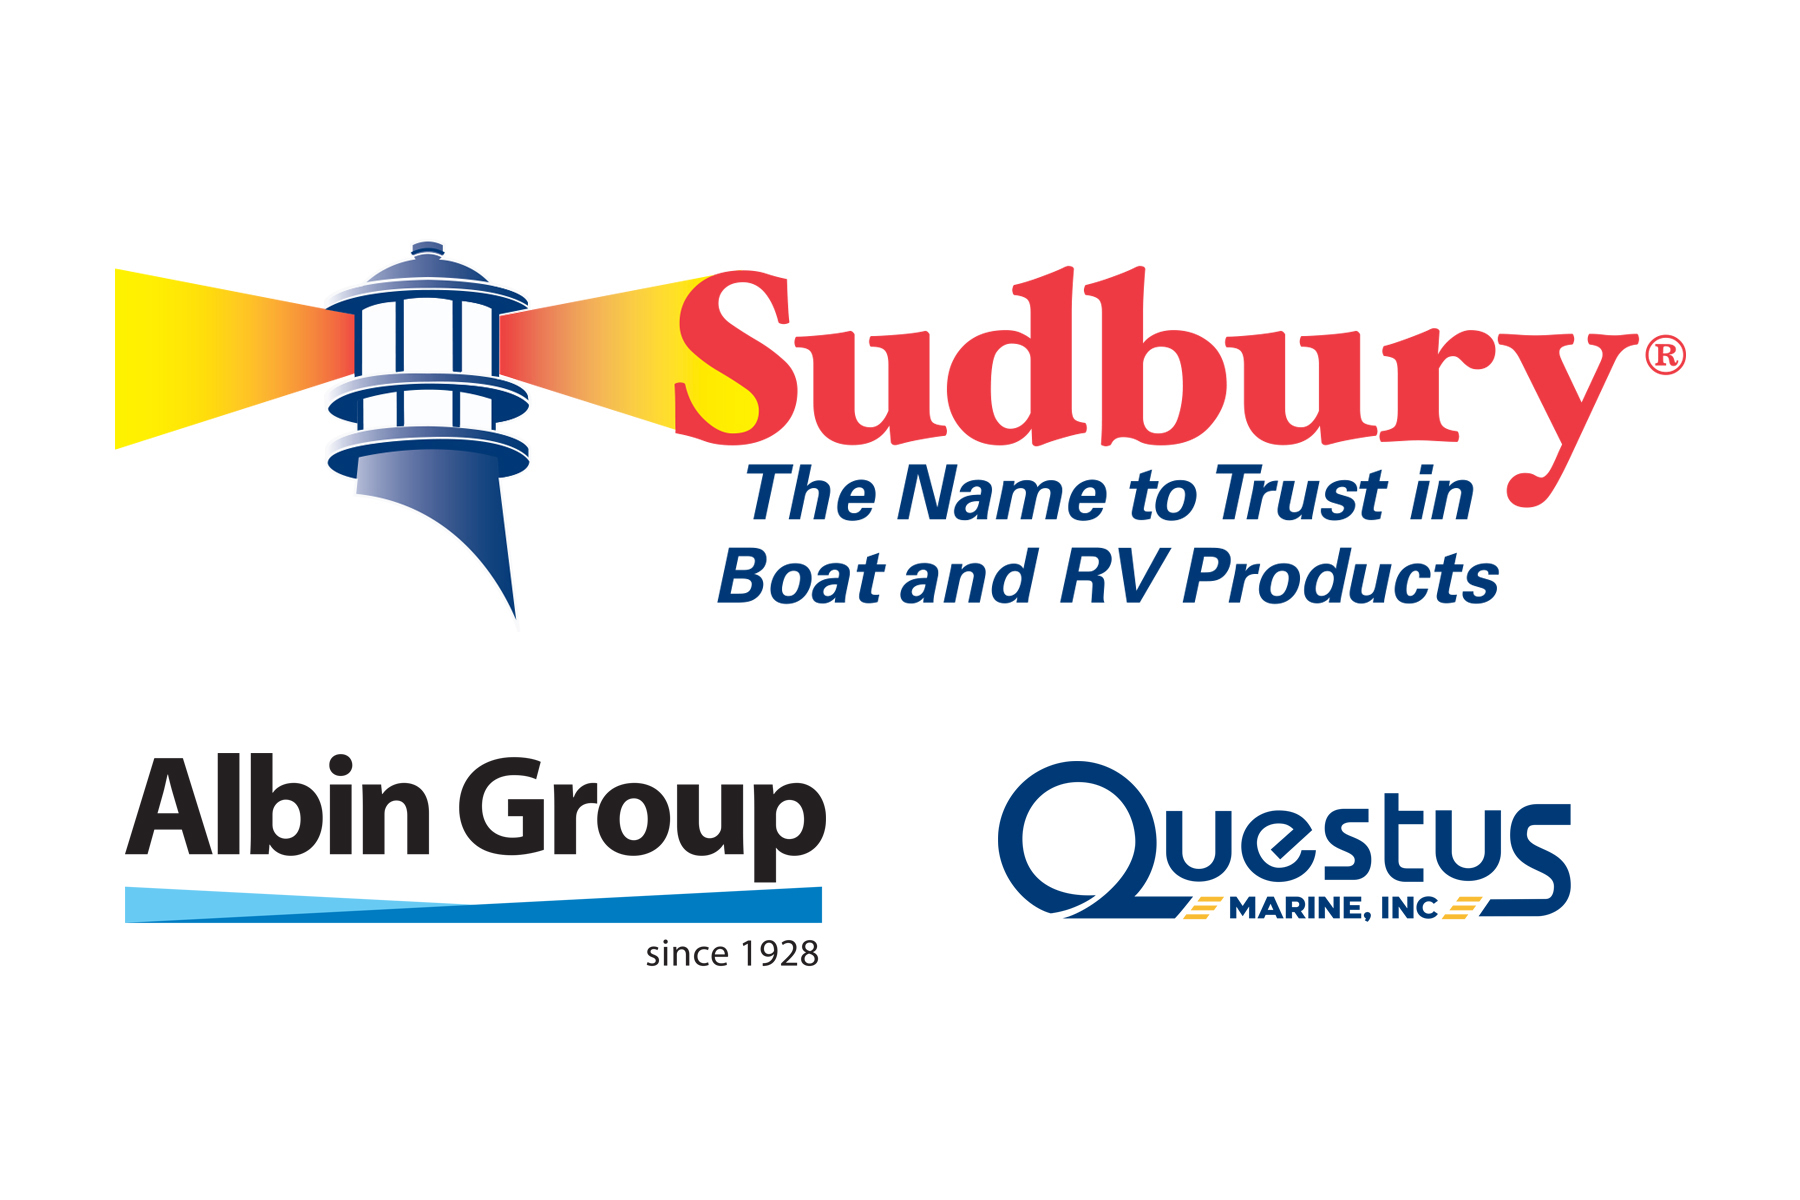 Sudbury buys majority share of Albin and also acquires Questus